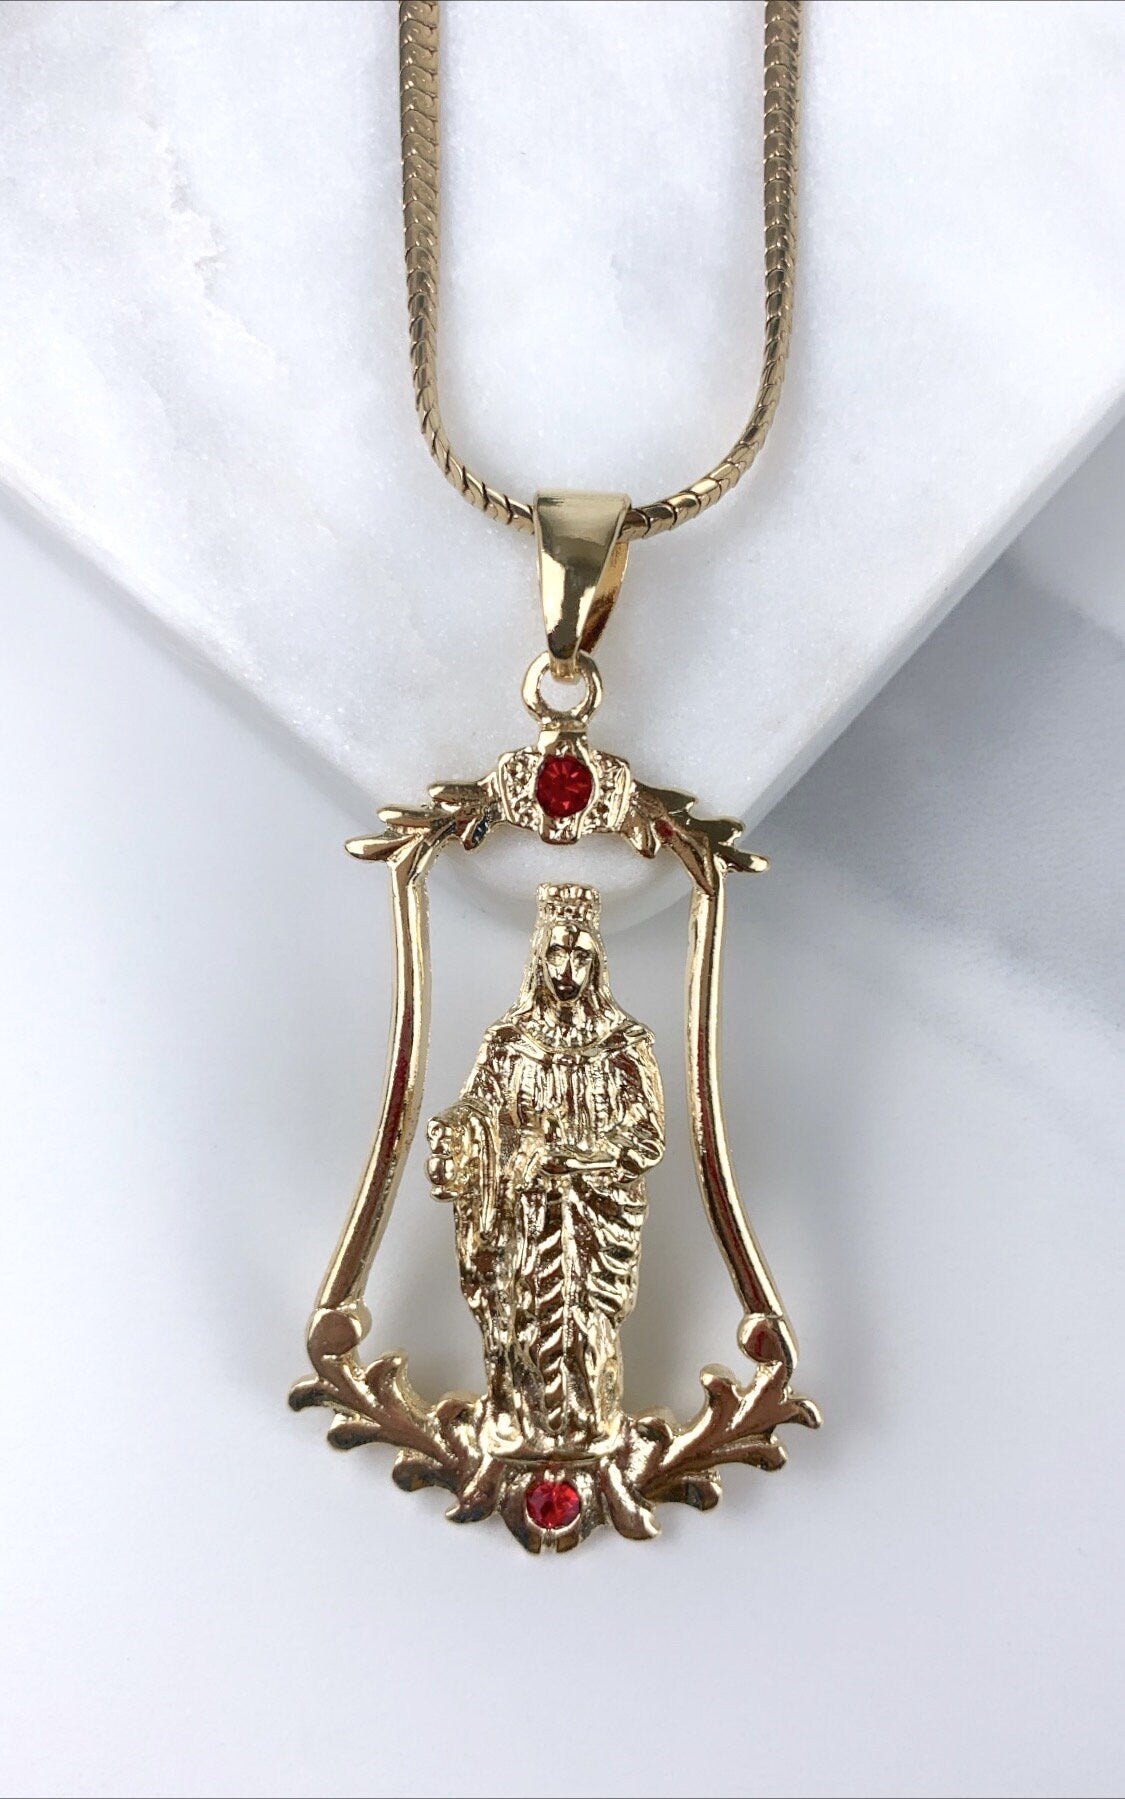 18k Gold Filled Santa Barbara with Red Cubic Zirconia Pendant Charms, Snake Chain Available, Wholesale Jewelry Making Supplies